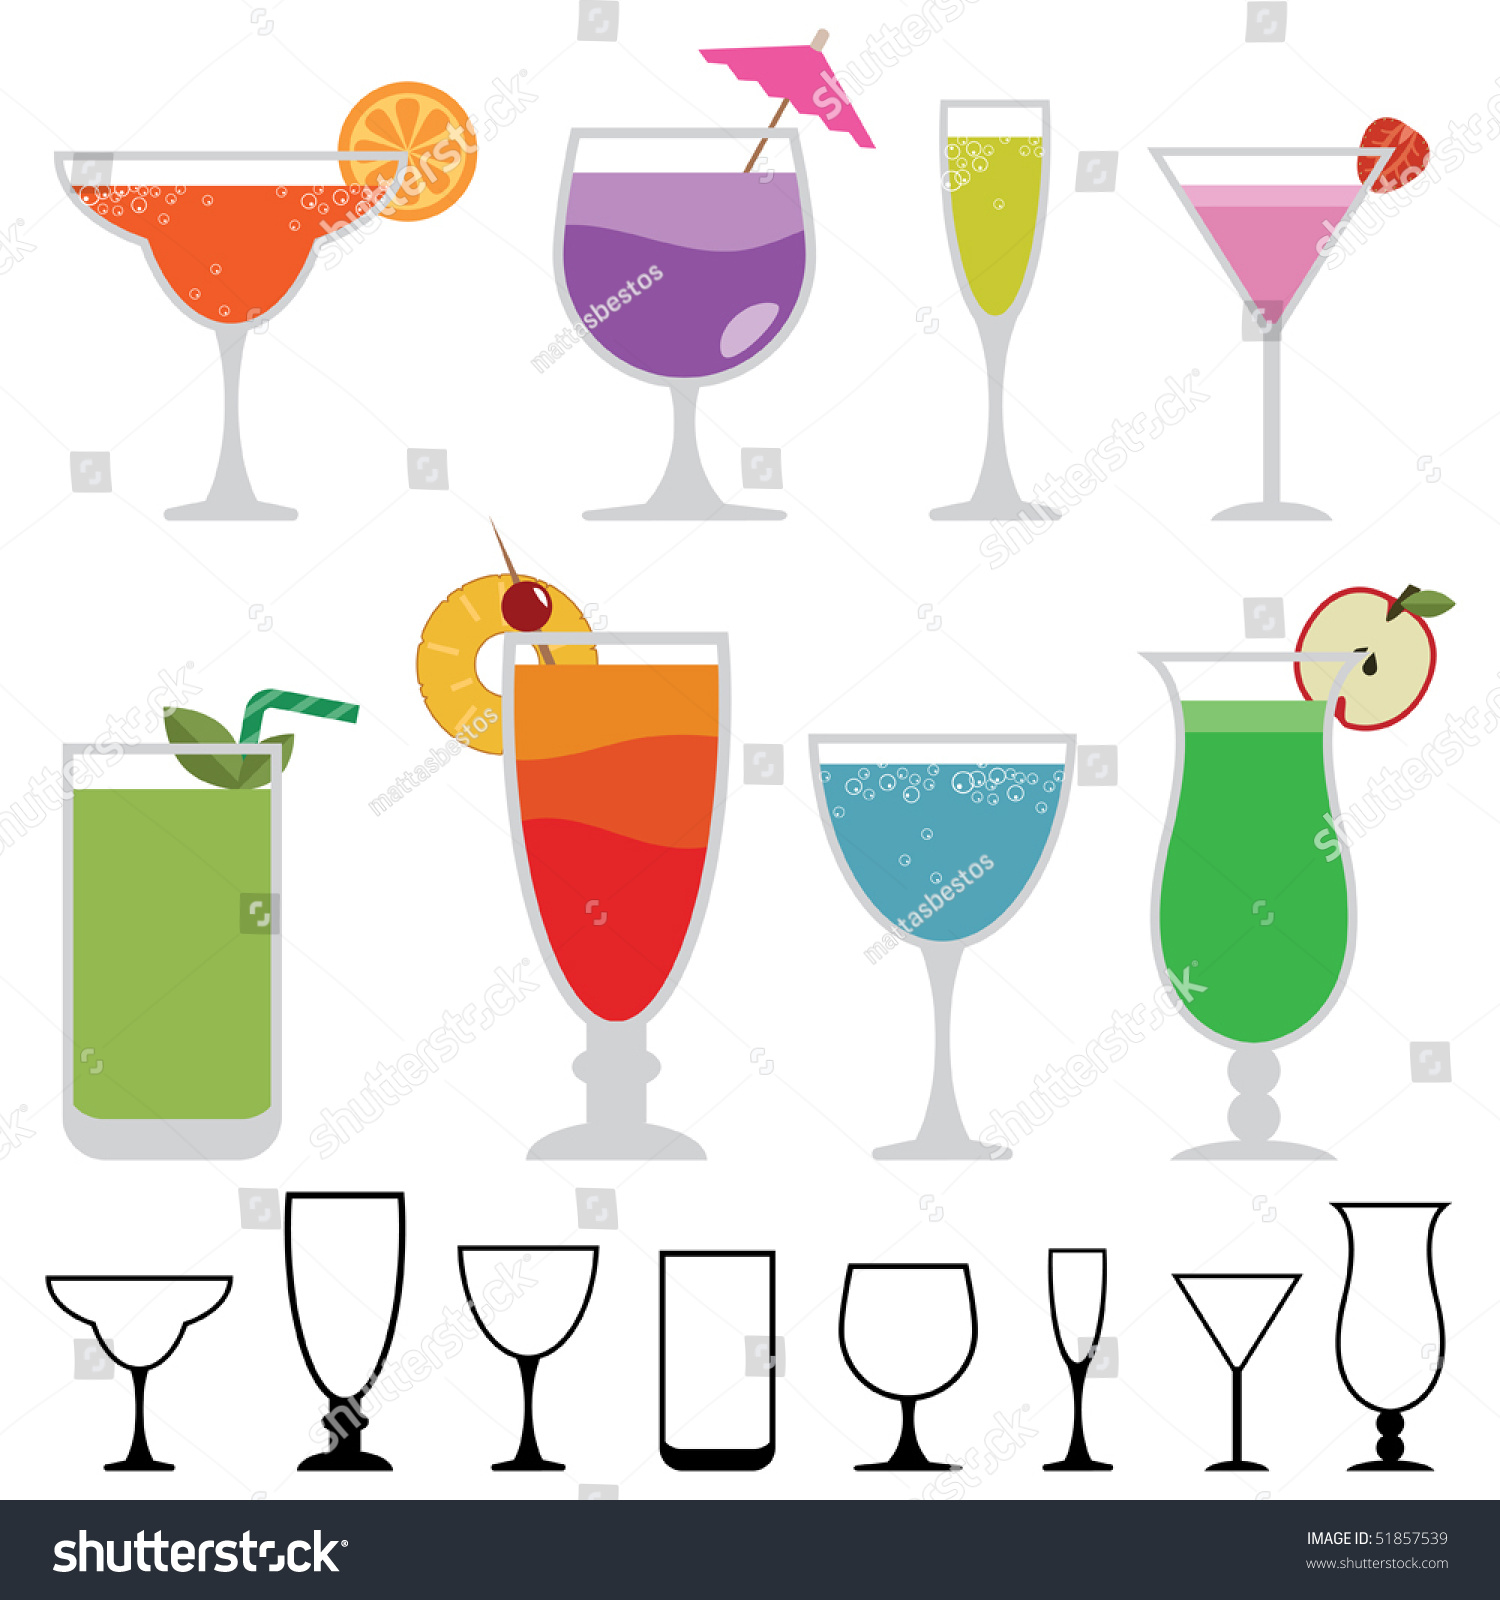 SVG of collection of funky glasses with colorful cocktail drinks isolated on white svg